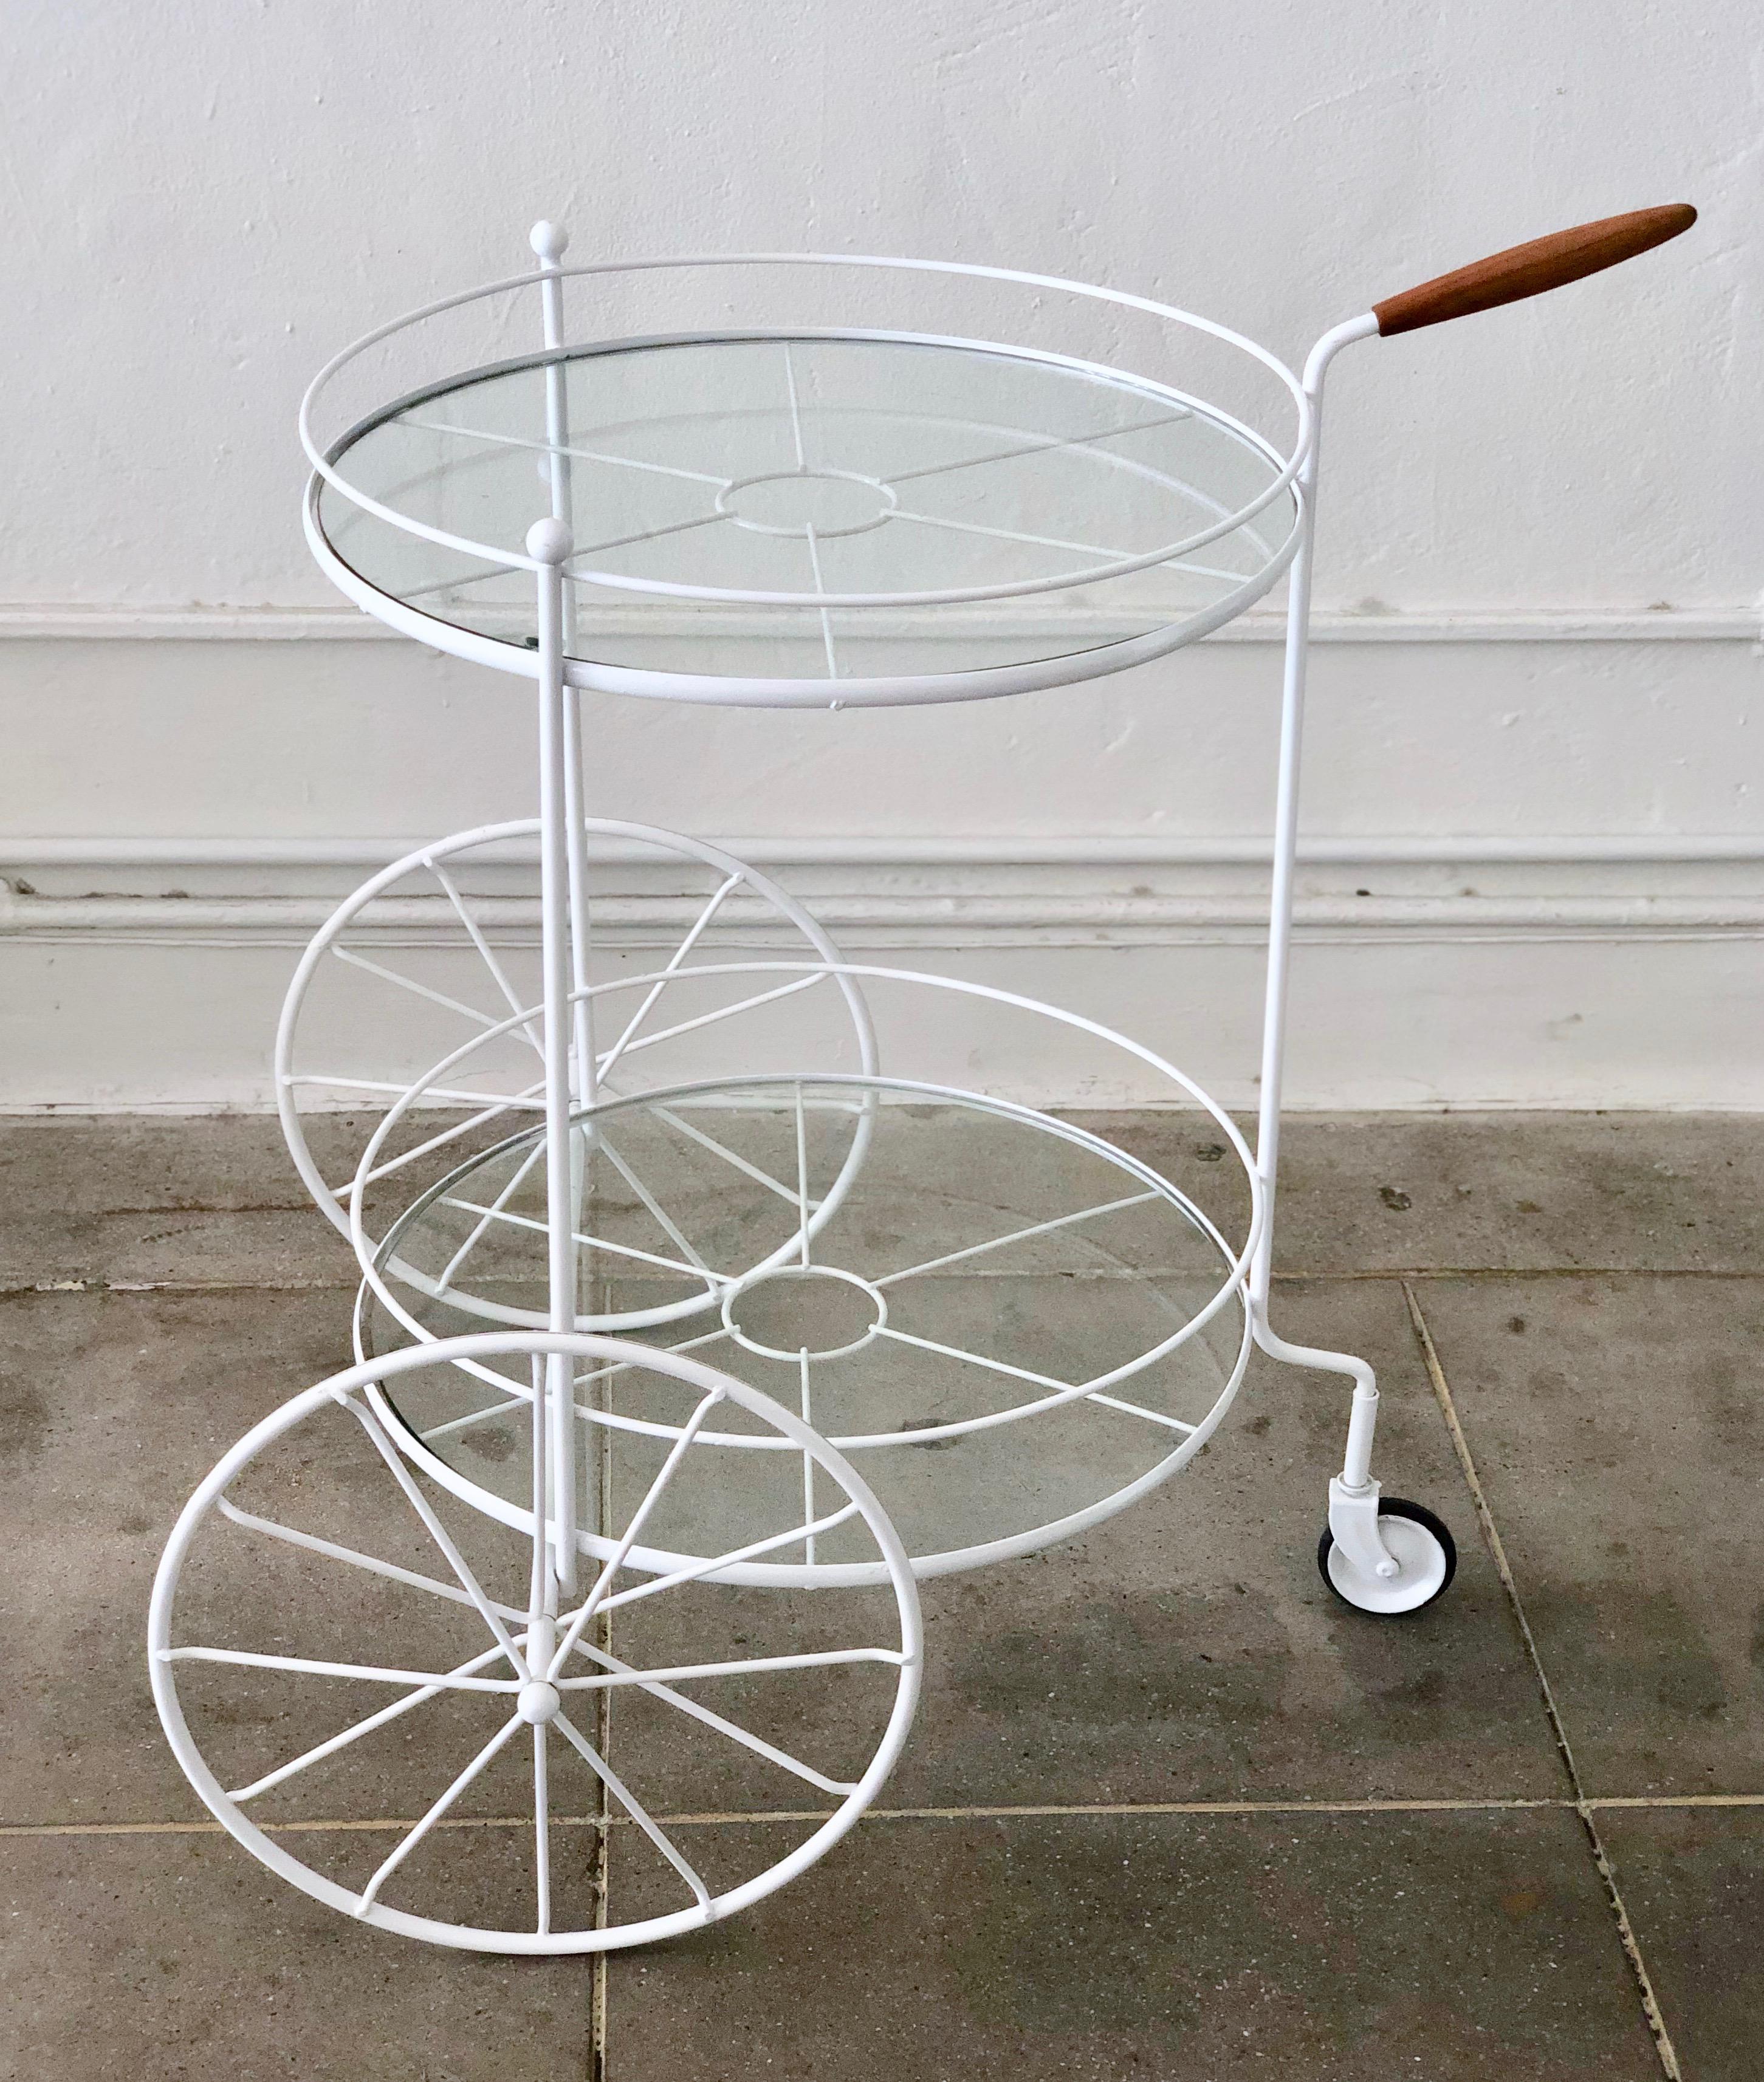 A charming bar cart that is equally at home indoors or outdoors on the patio. This vintage trolley has 2 front large powder coated wheels and a small third wheel in the back and a top handle made of wood. There are two circular pieces of glass